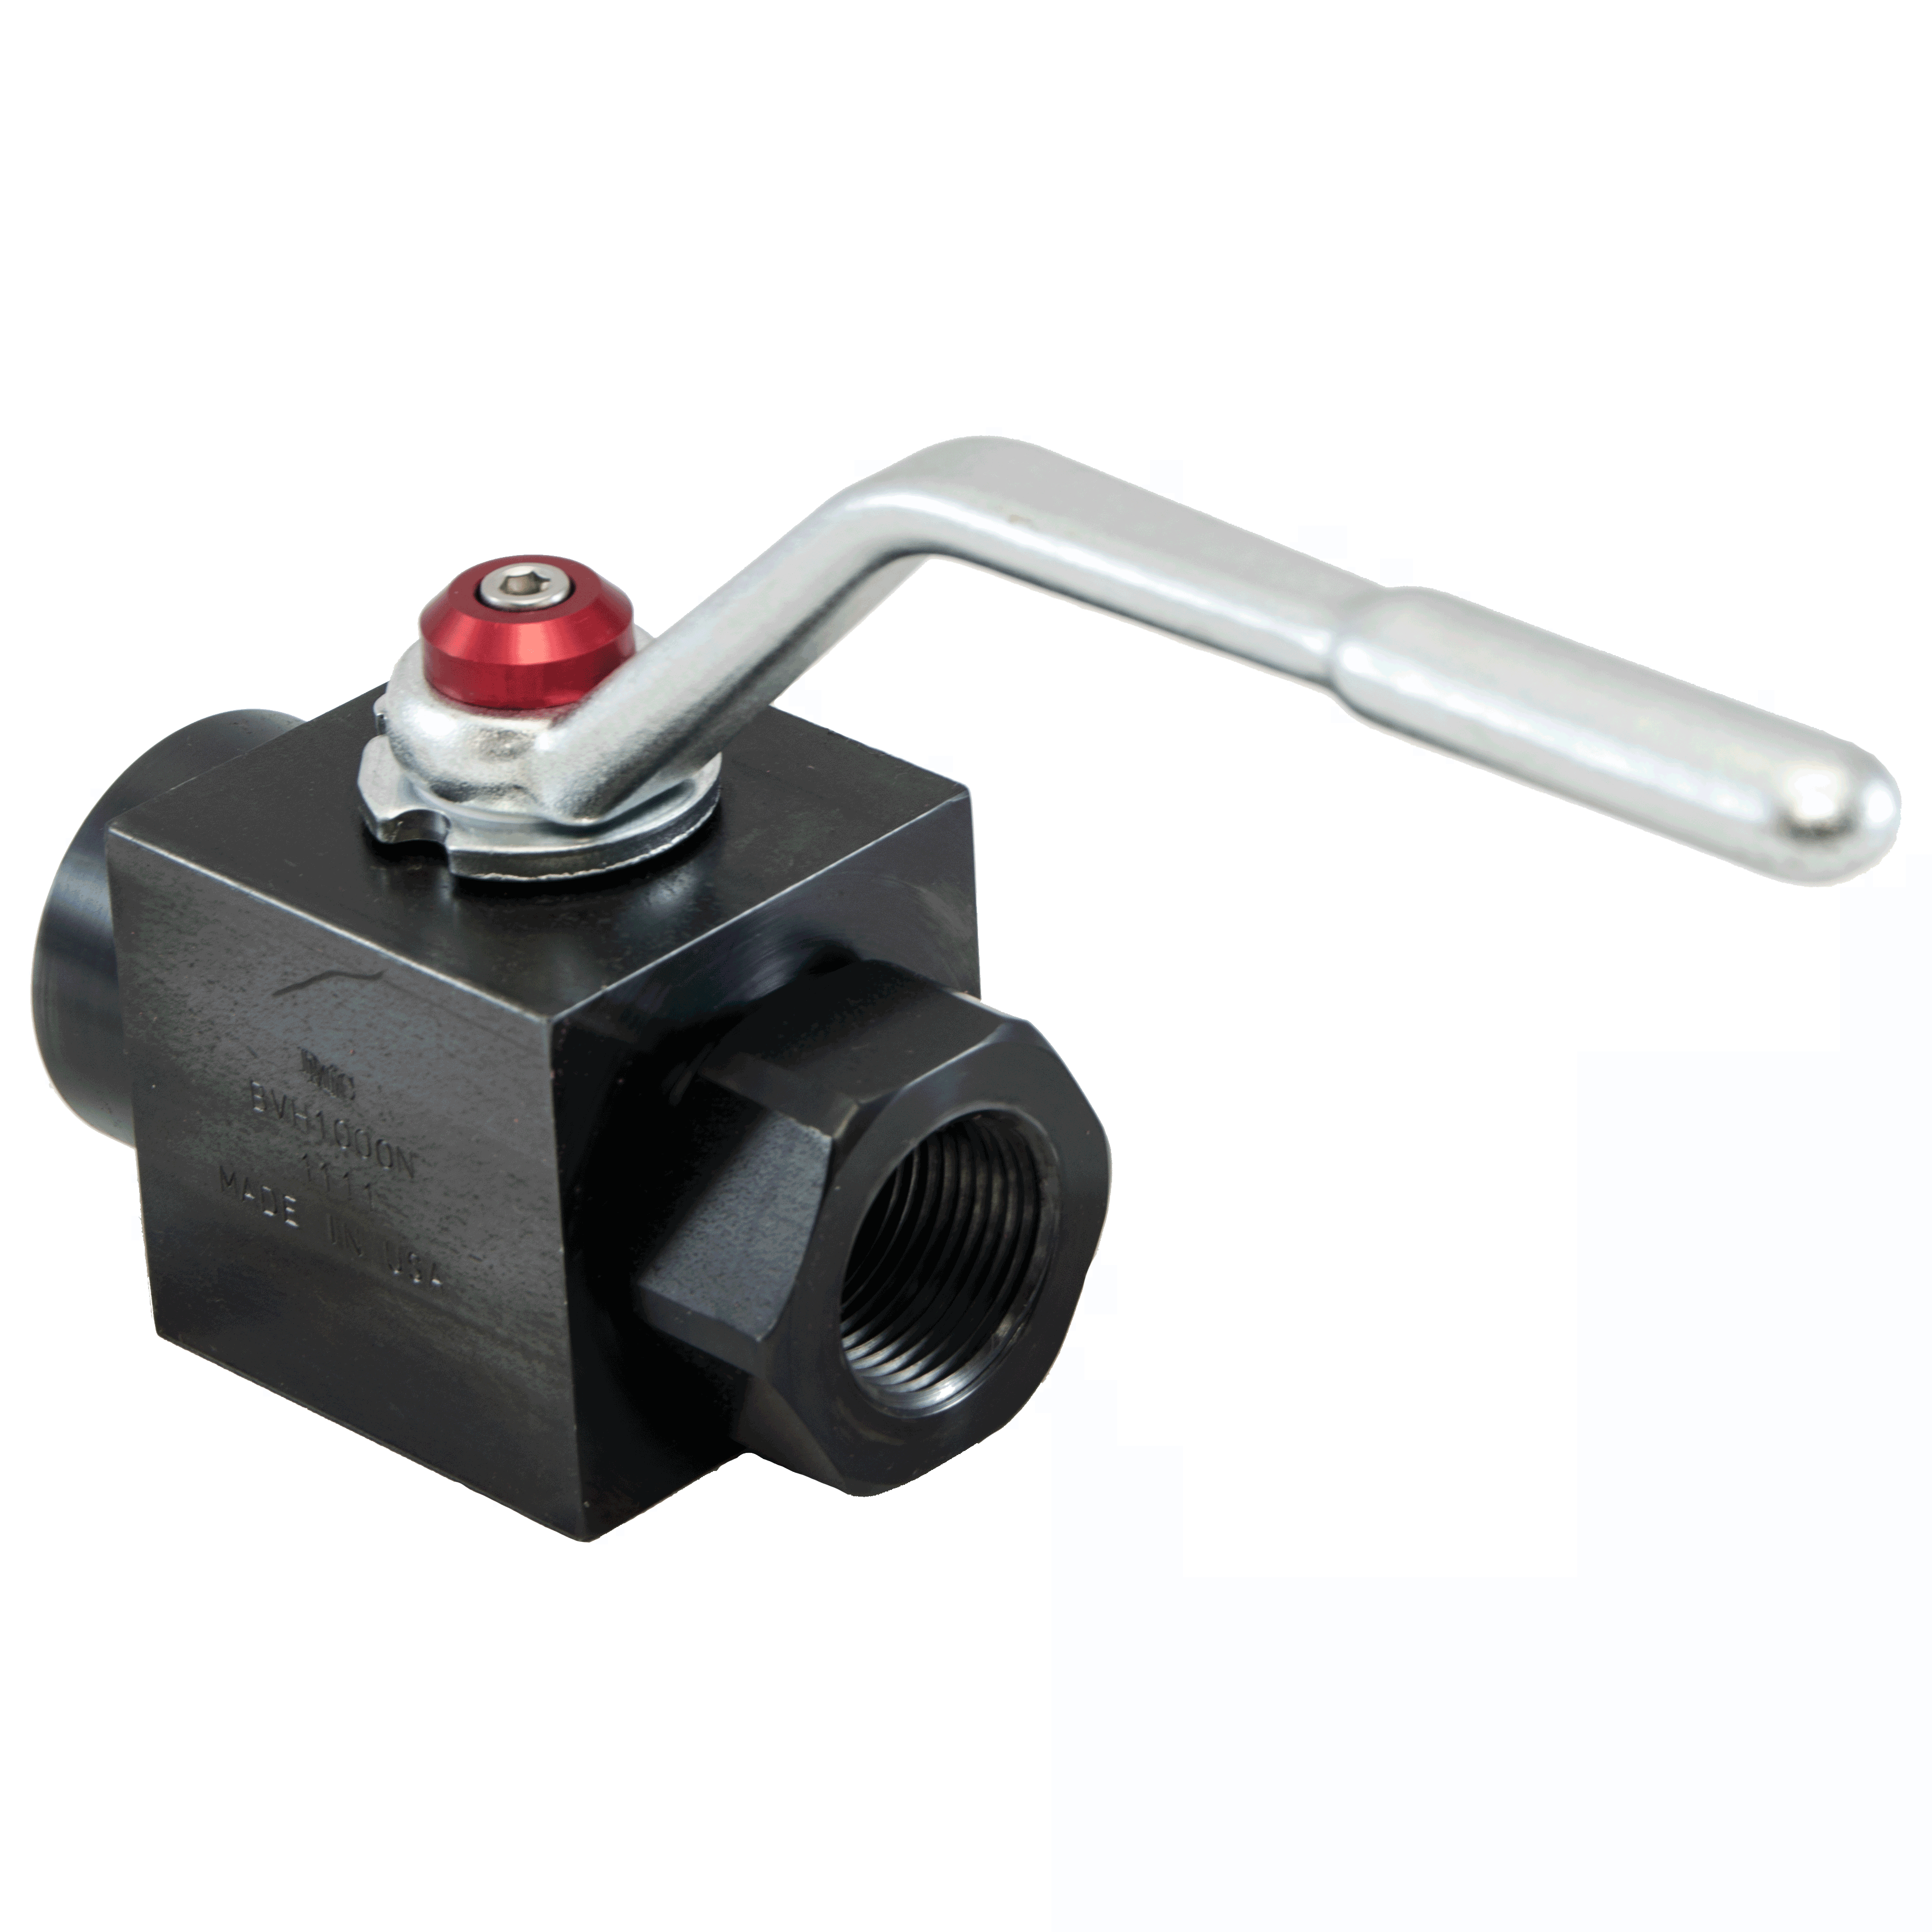 BVH-0250S-1111 : DMIC Square Body Ball Valve, #4 SAE (1/4), Carbon Steel, 7500psi, Two-Way